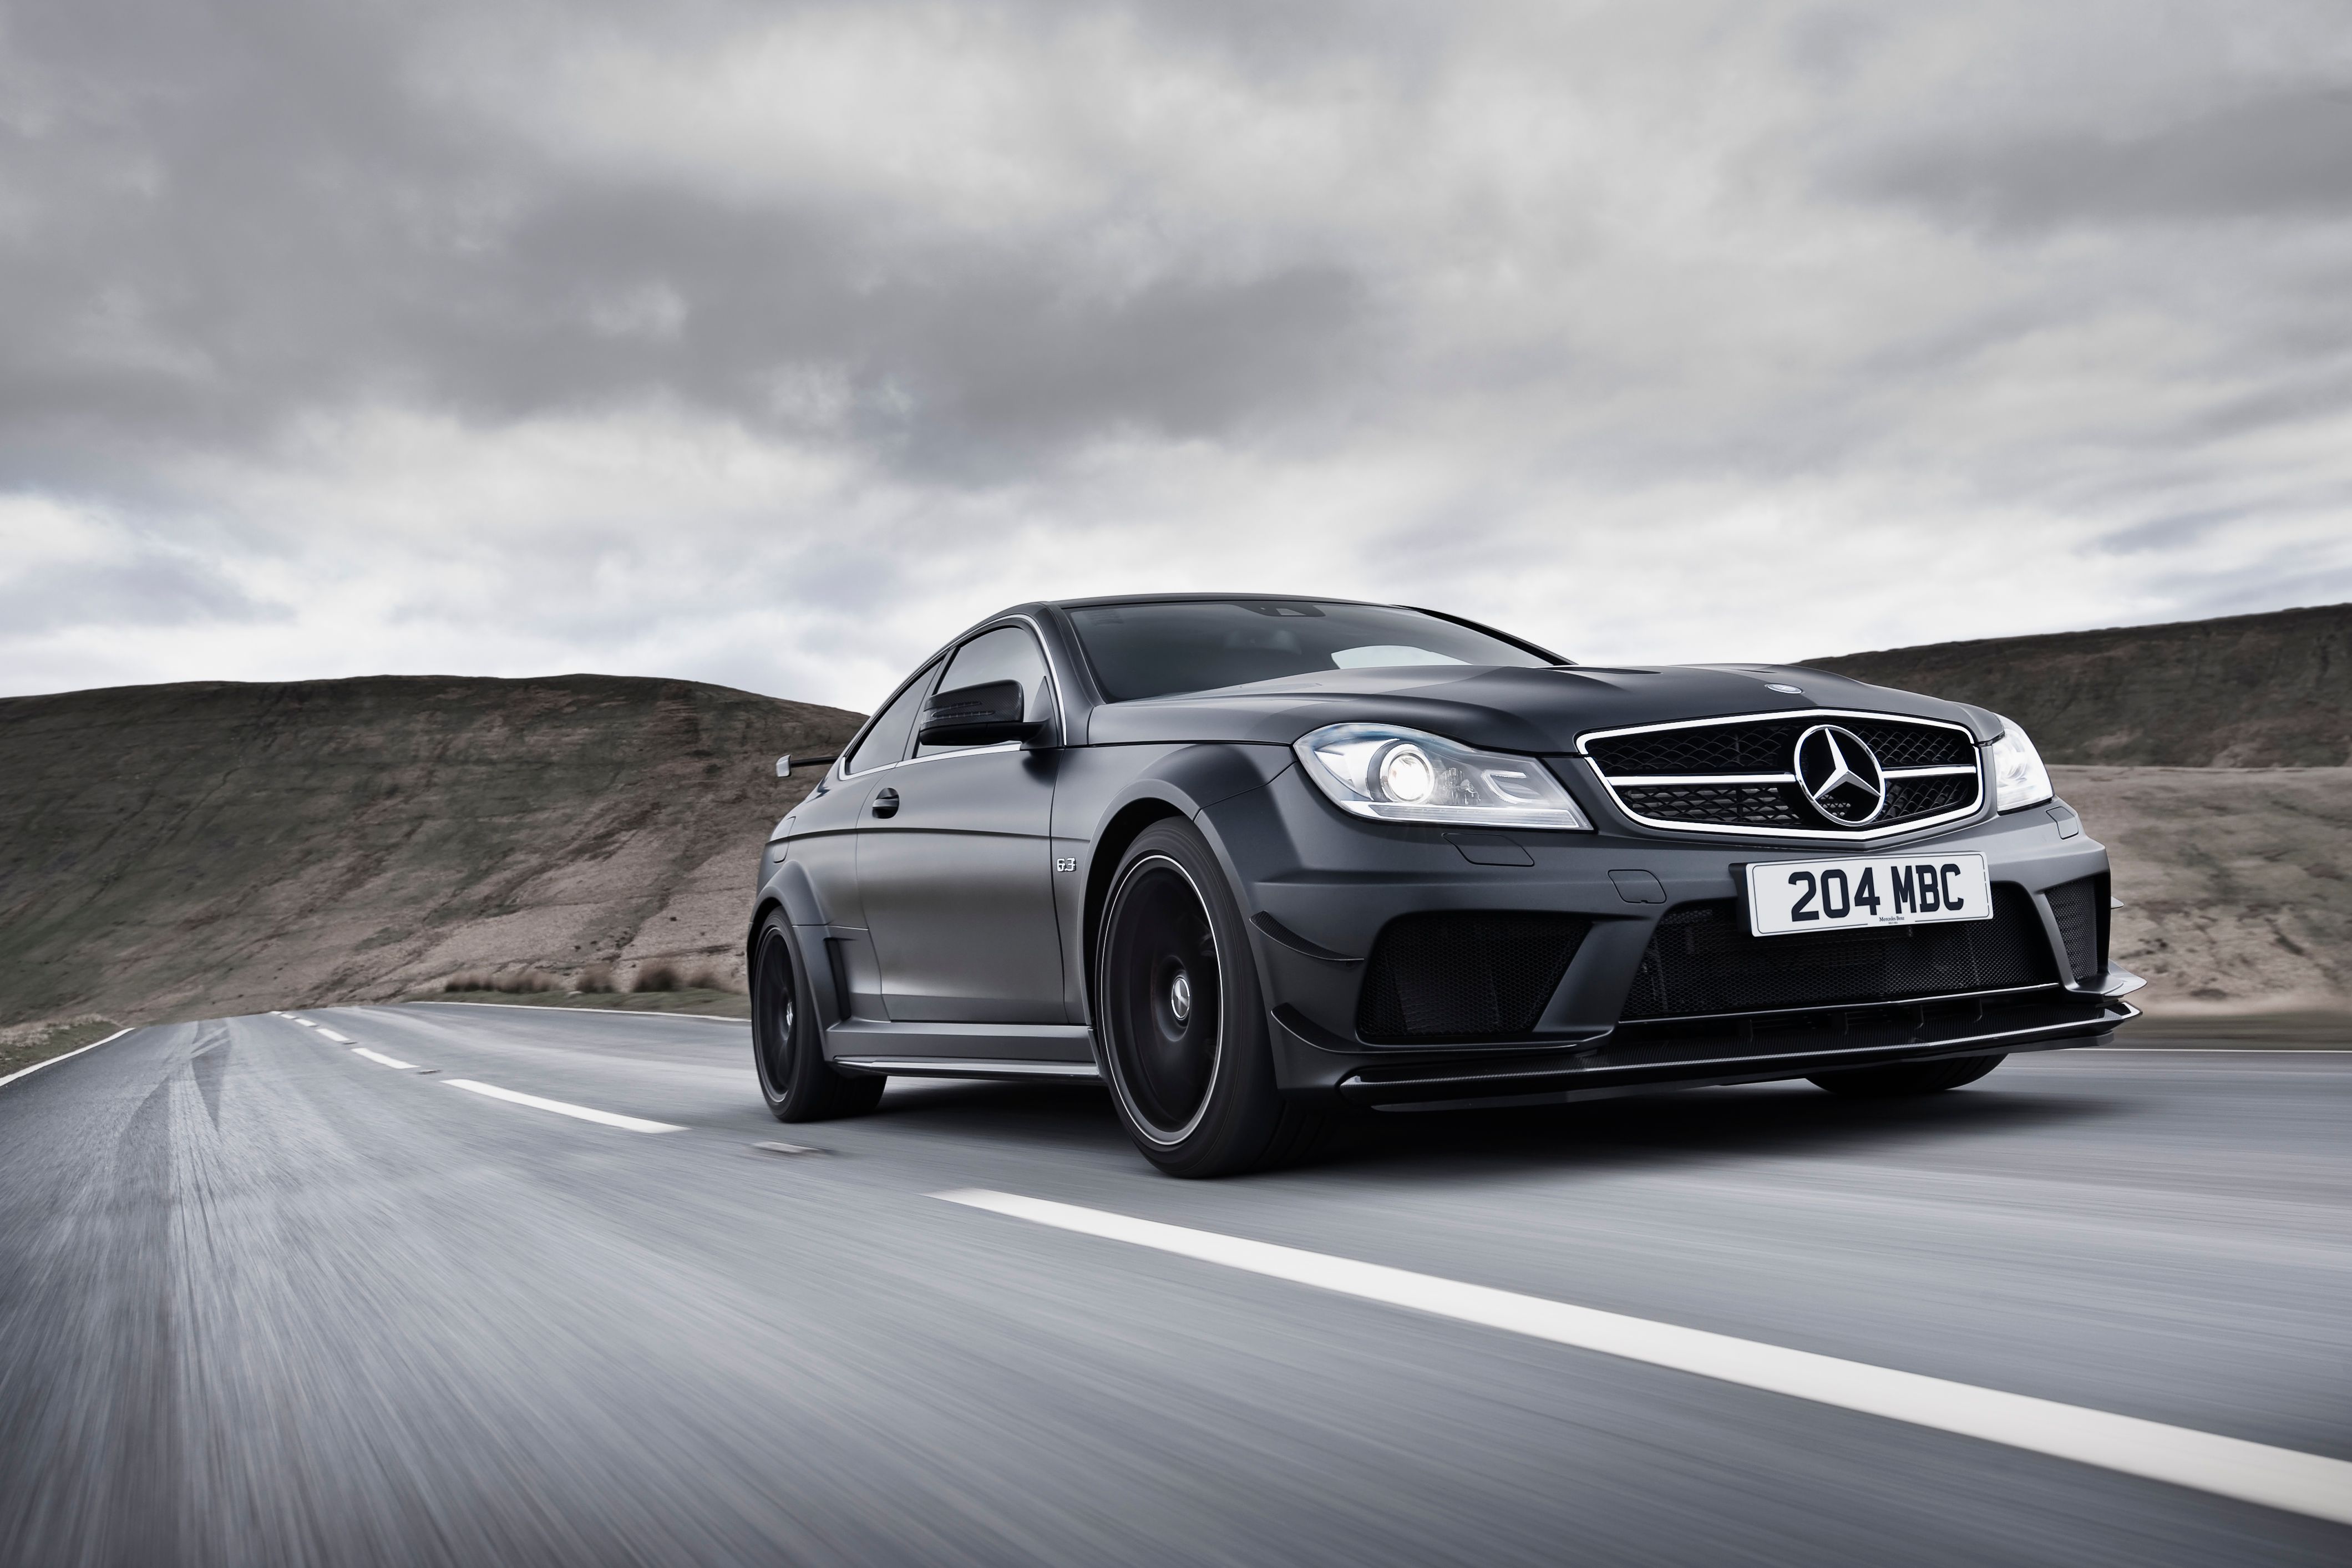 A Mercedes C 63 AMG Black Series on the road.